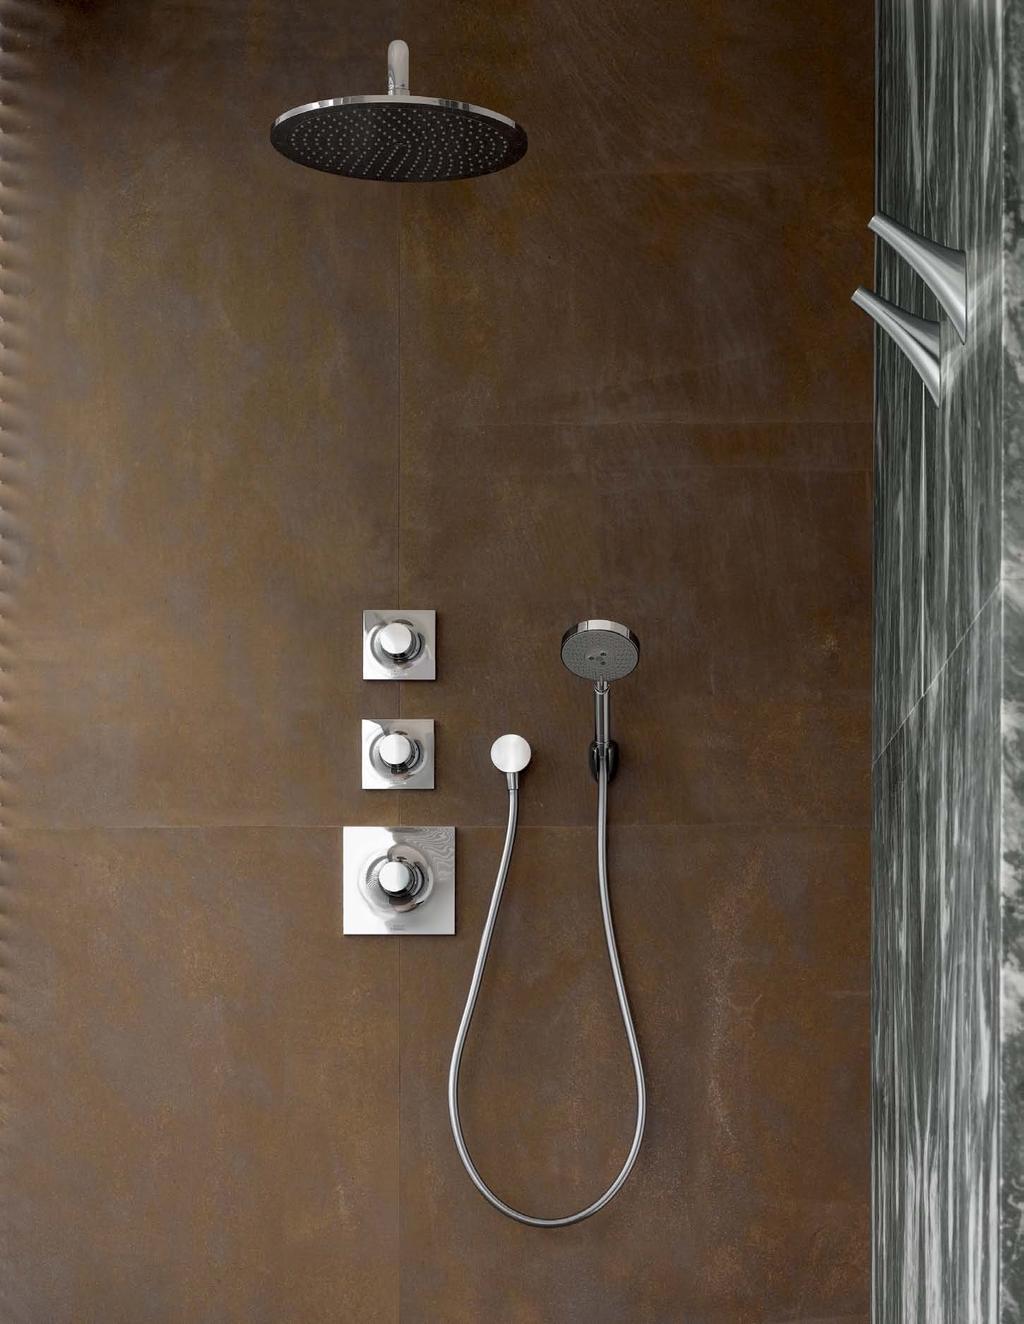 Thermostatic plus Two Volume Controls. Fine-tuning your shower experience is as natural as it is intuitive in this shower configuration.